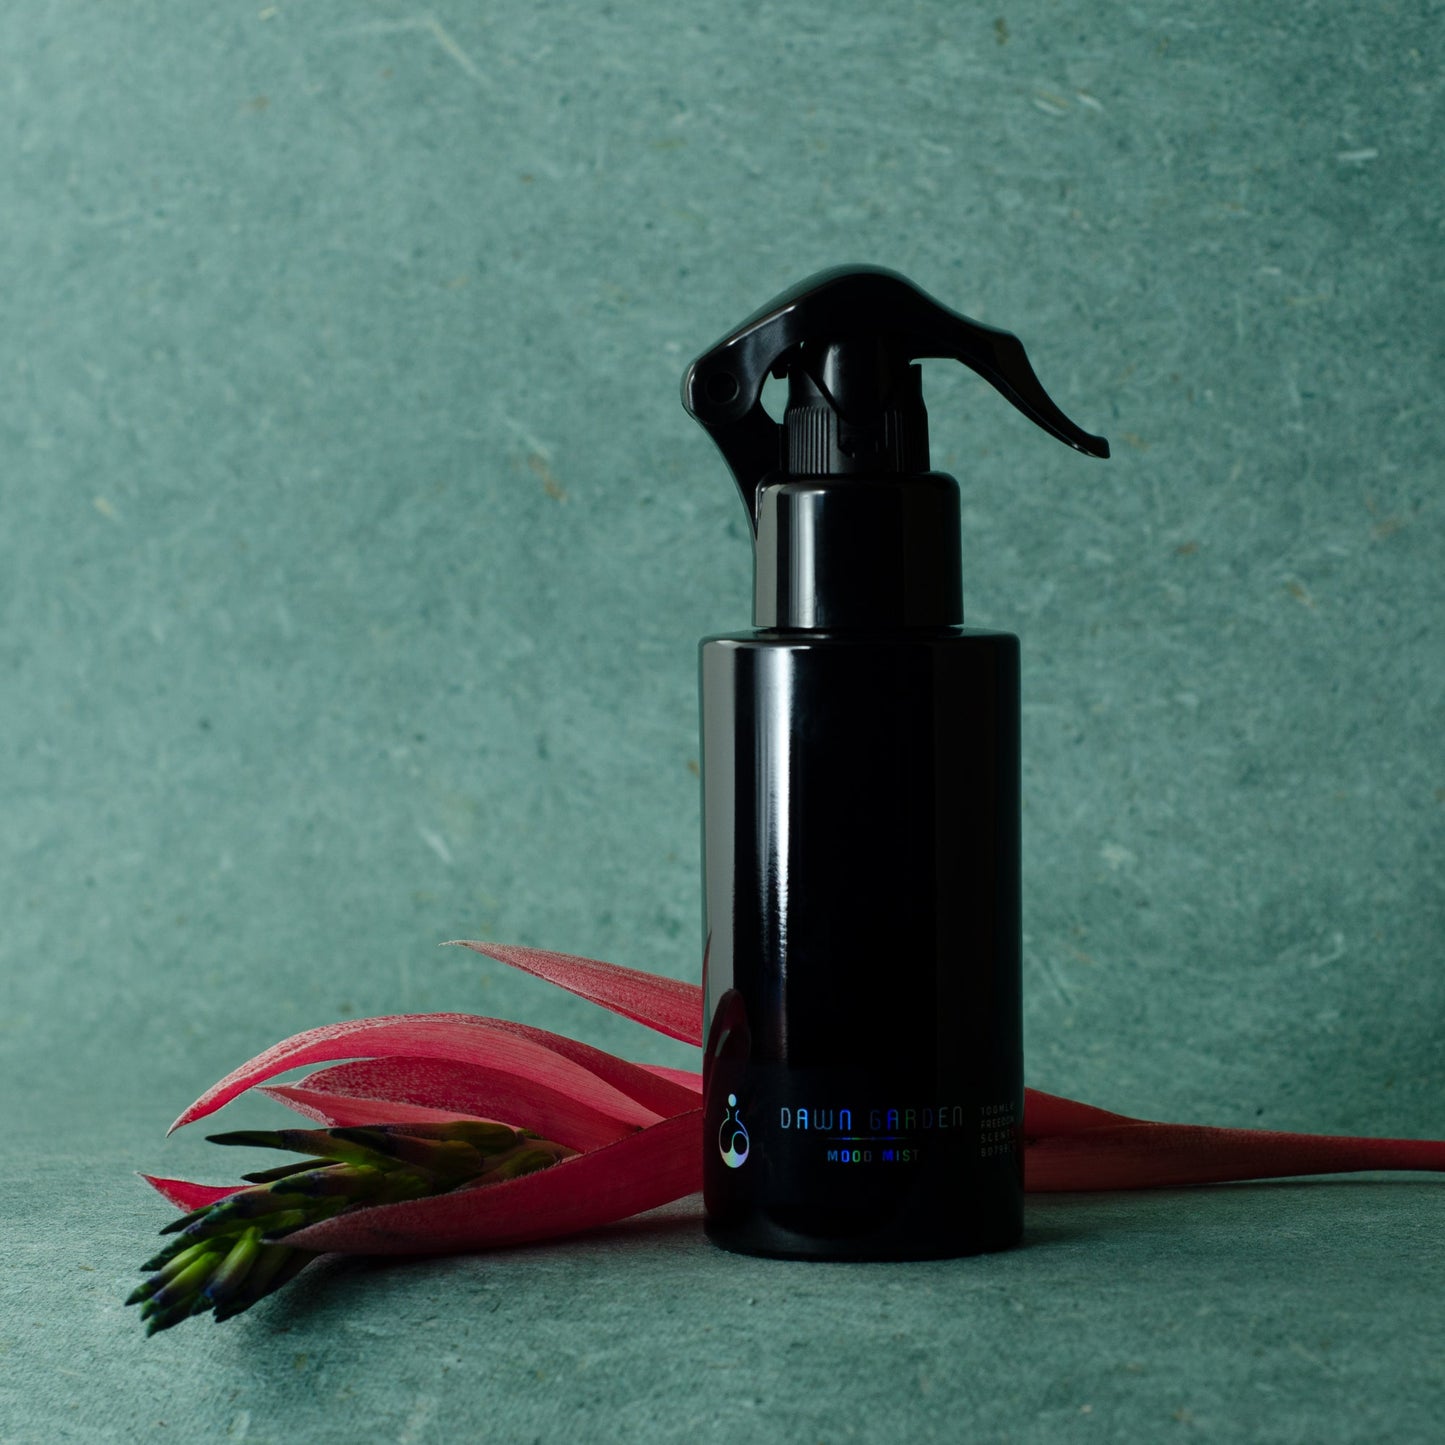 Freedom scents mood mist room pillow and linen spray pictured on a lavender background d with a tropical flower next to the bottle. A black round bottle with a black pump spray and a black label with blue and white text.